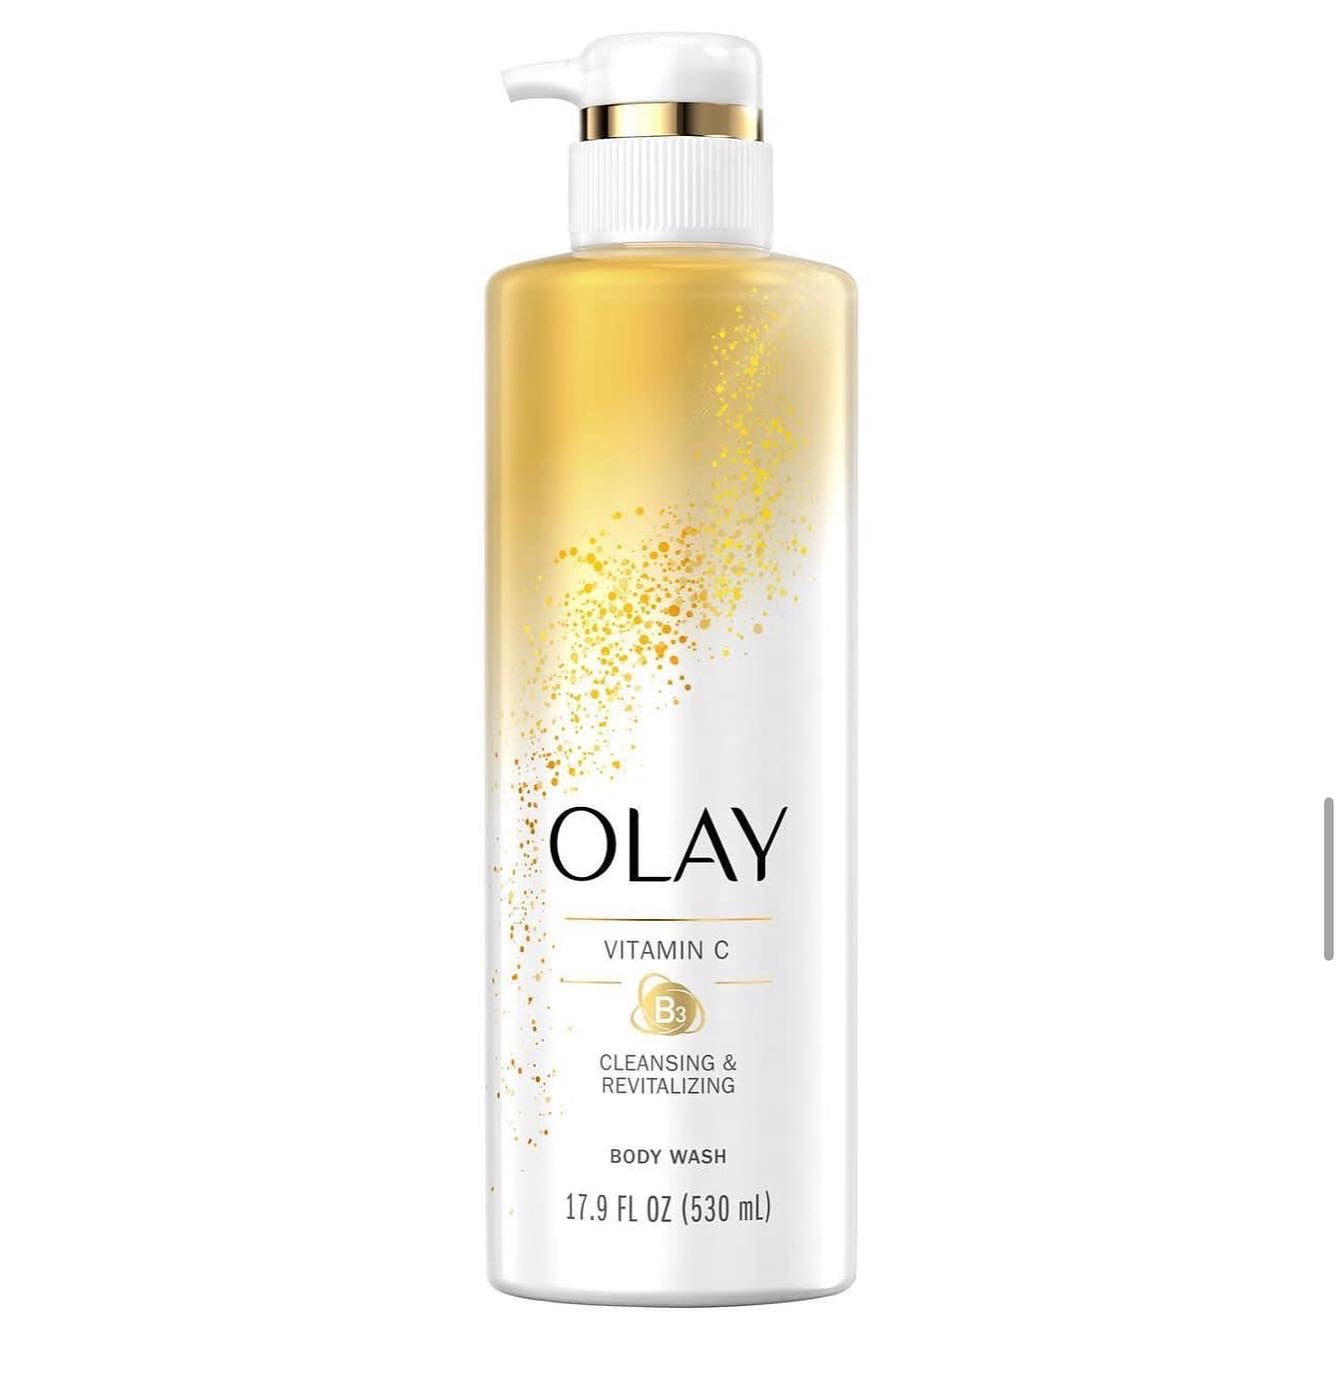 OLAY CLEANSING & REVITALIZING BODY WASH WITH B3 + VITAMIN C